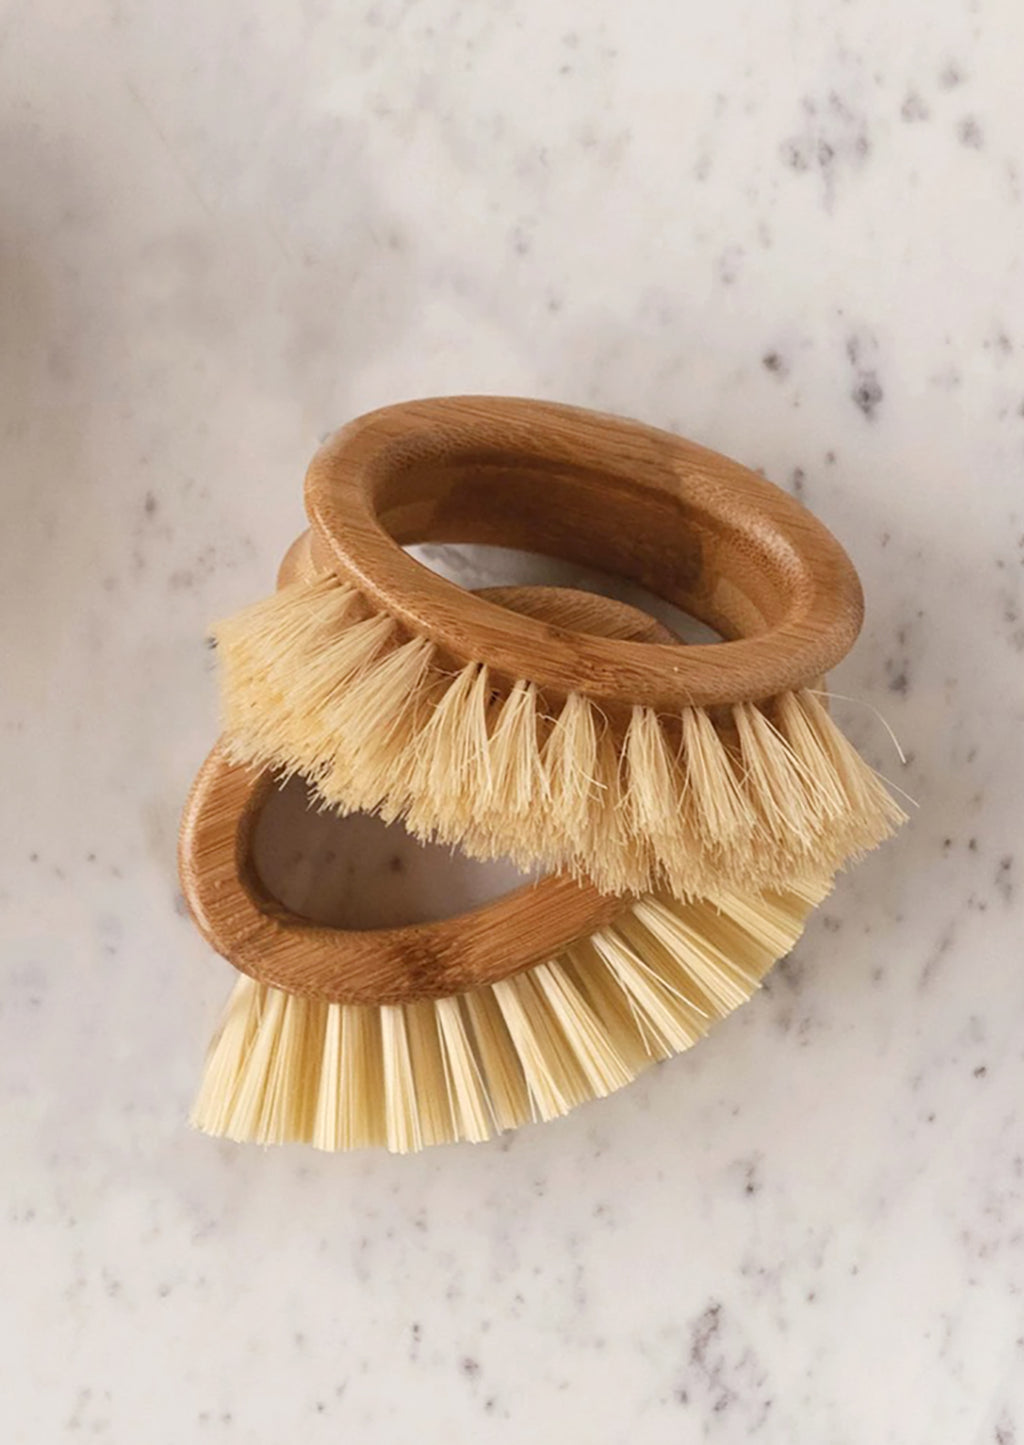 2: Oval-shaped handheld kitchen brushes on a marble countertop